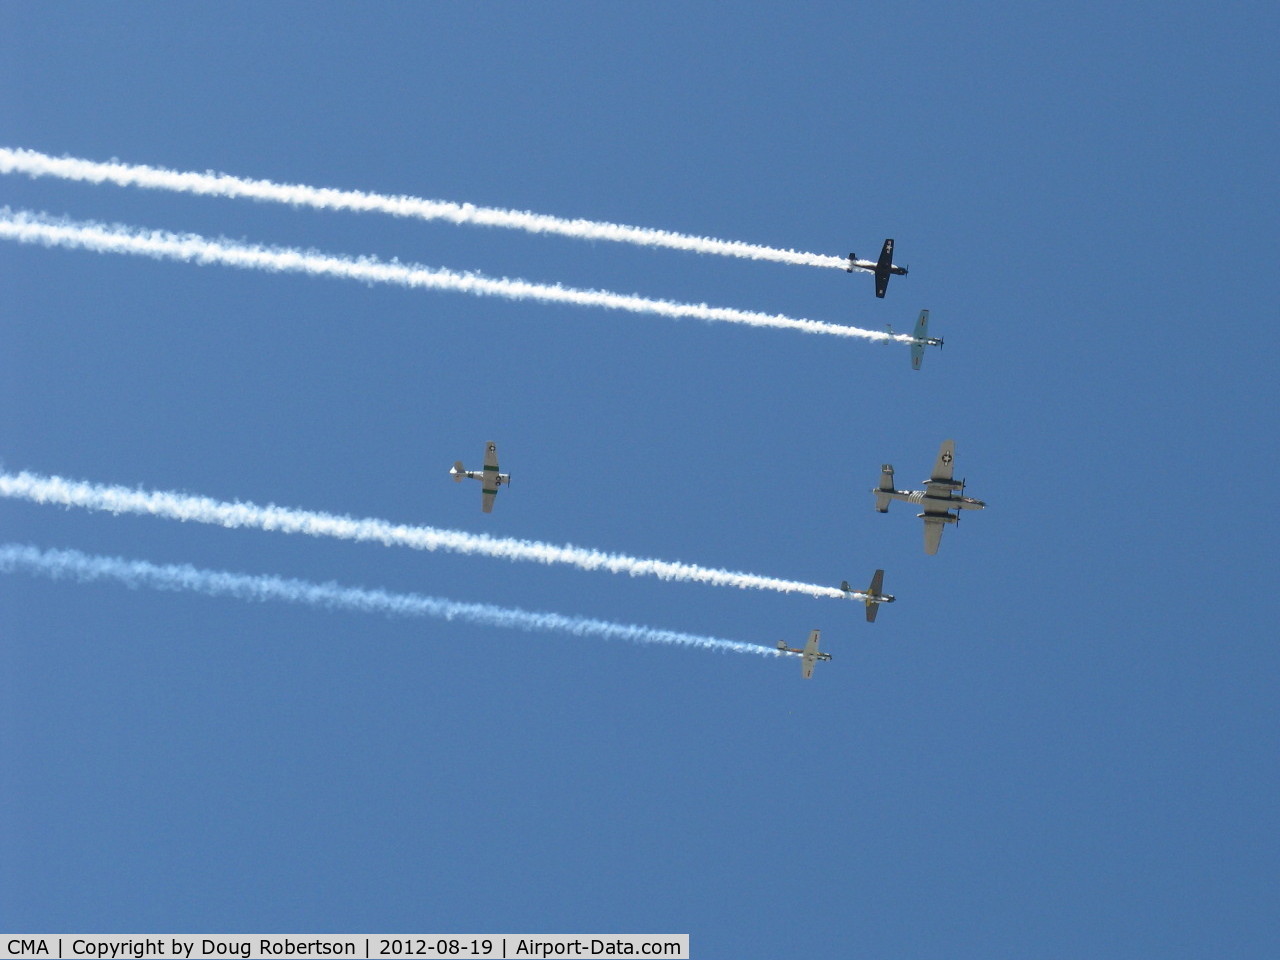 Camarillo Airport (CMA) - Condor Squadron in formation flight with smoke over 08 with N45366 'D-Day Doll'